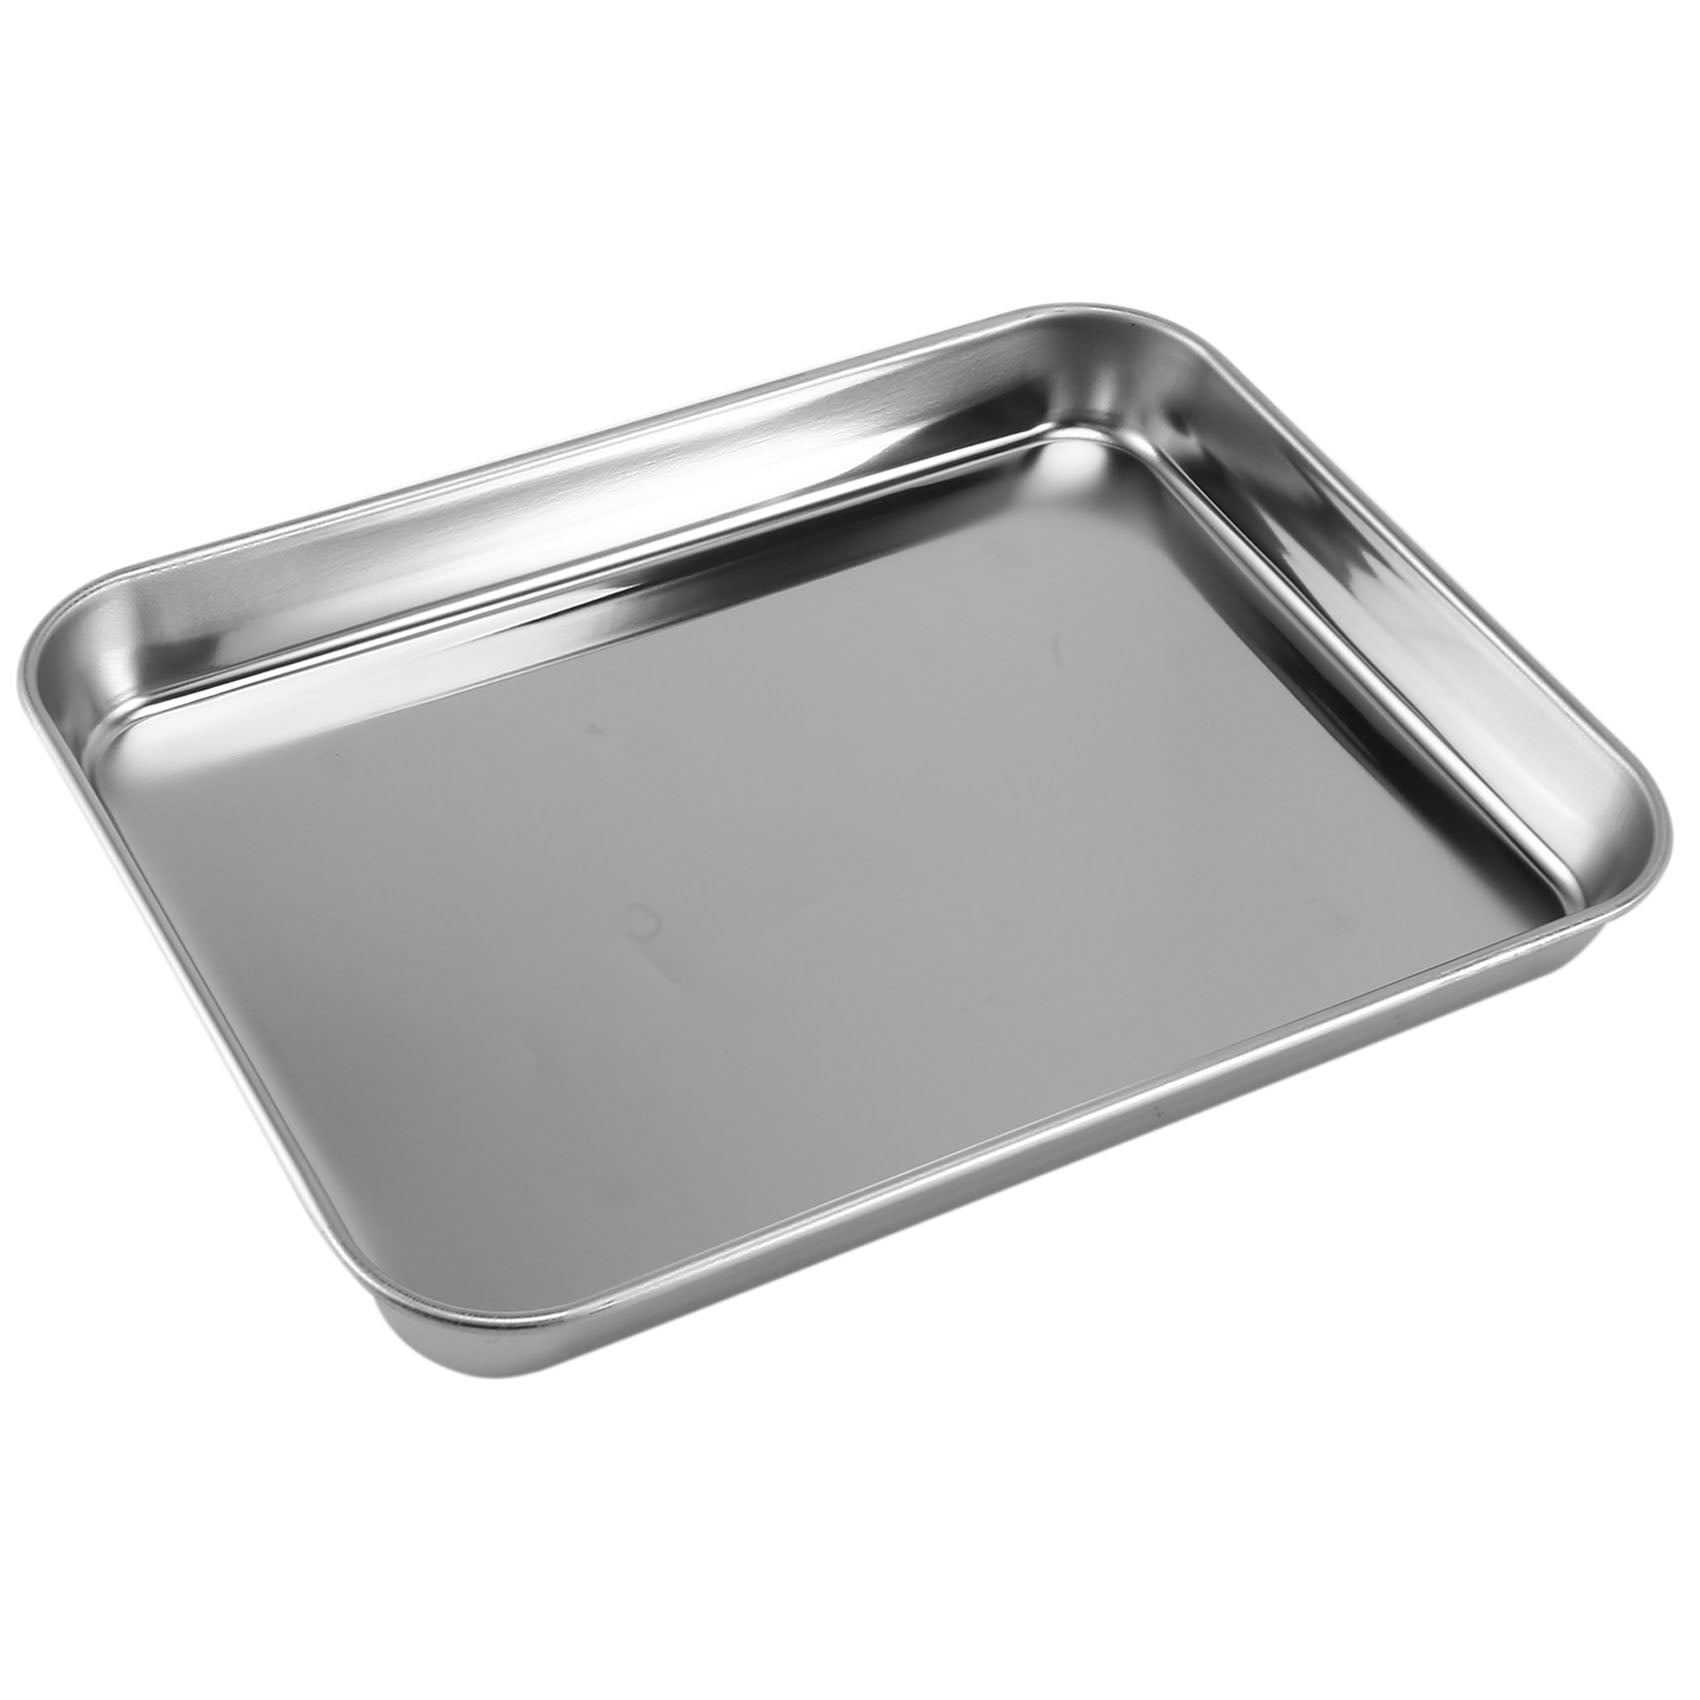 Metal Toaster Oven Tray Set, E-far 10.5”x8.3” Small Stainless Steel Baking  Pan with Wire Rack for Cooking Broiling, Rimmed Metal Sheet for Roasting